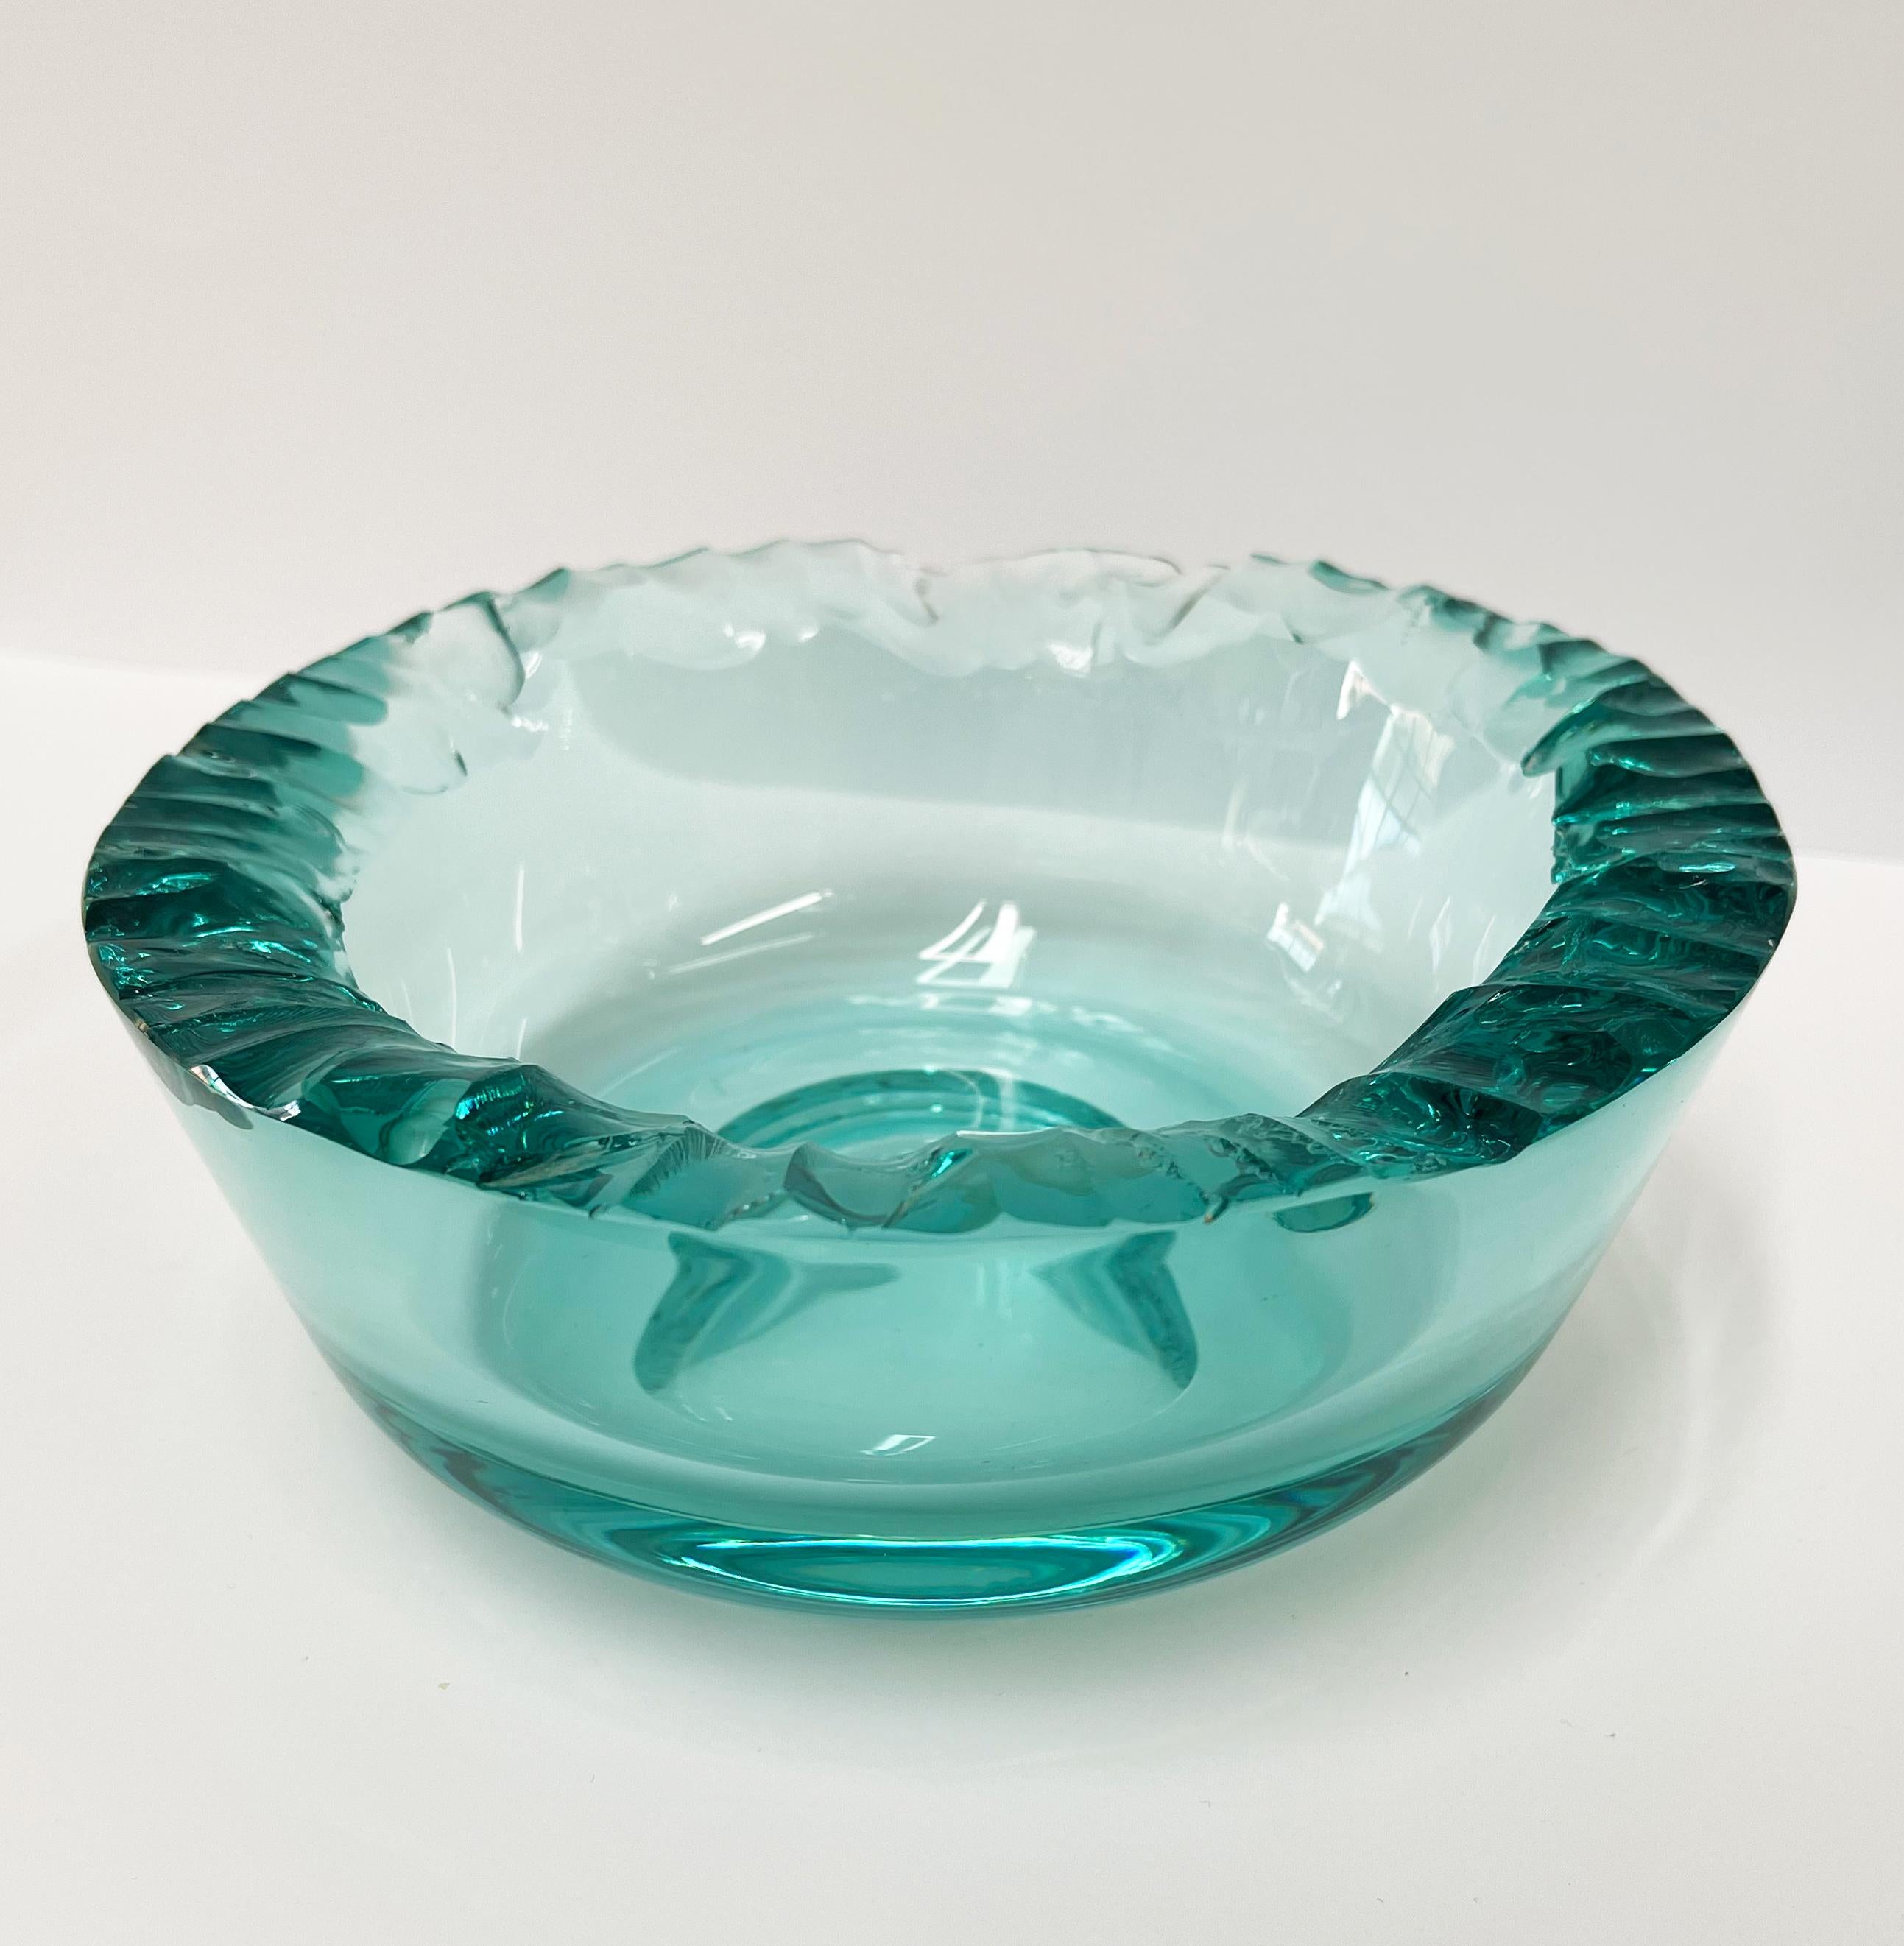 Hand-Crafted Contemporary Artistic Bowl Hand Crafted Aquamarine Crystal by Ghirò Studio For Sale